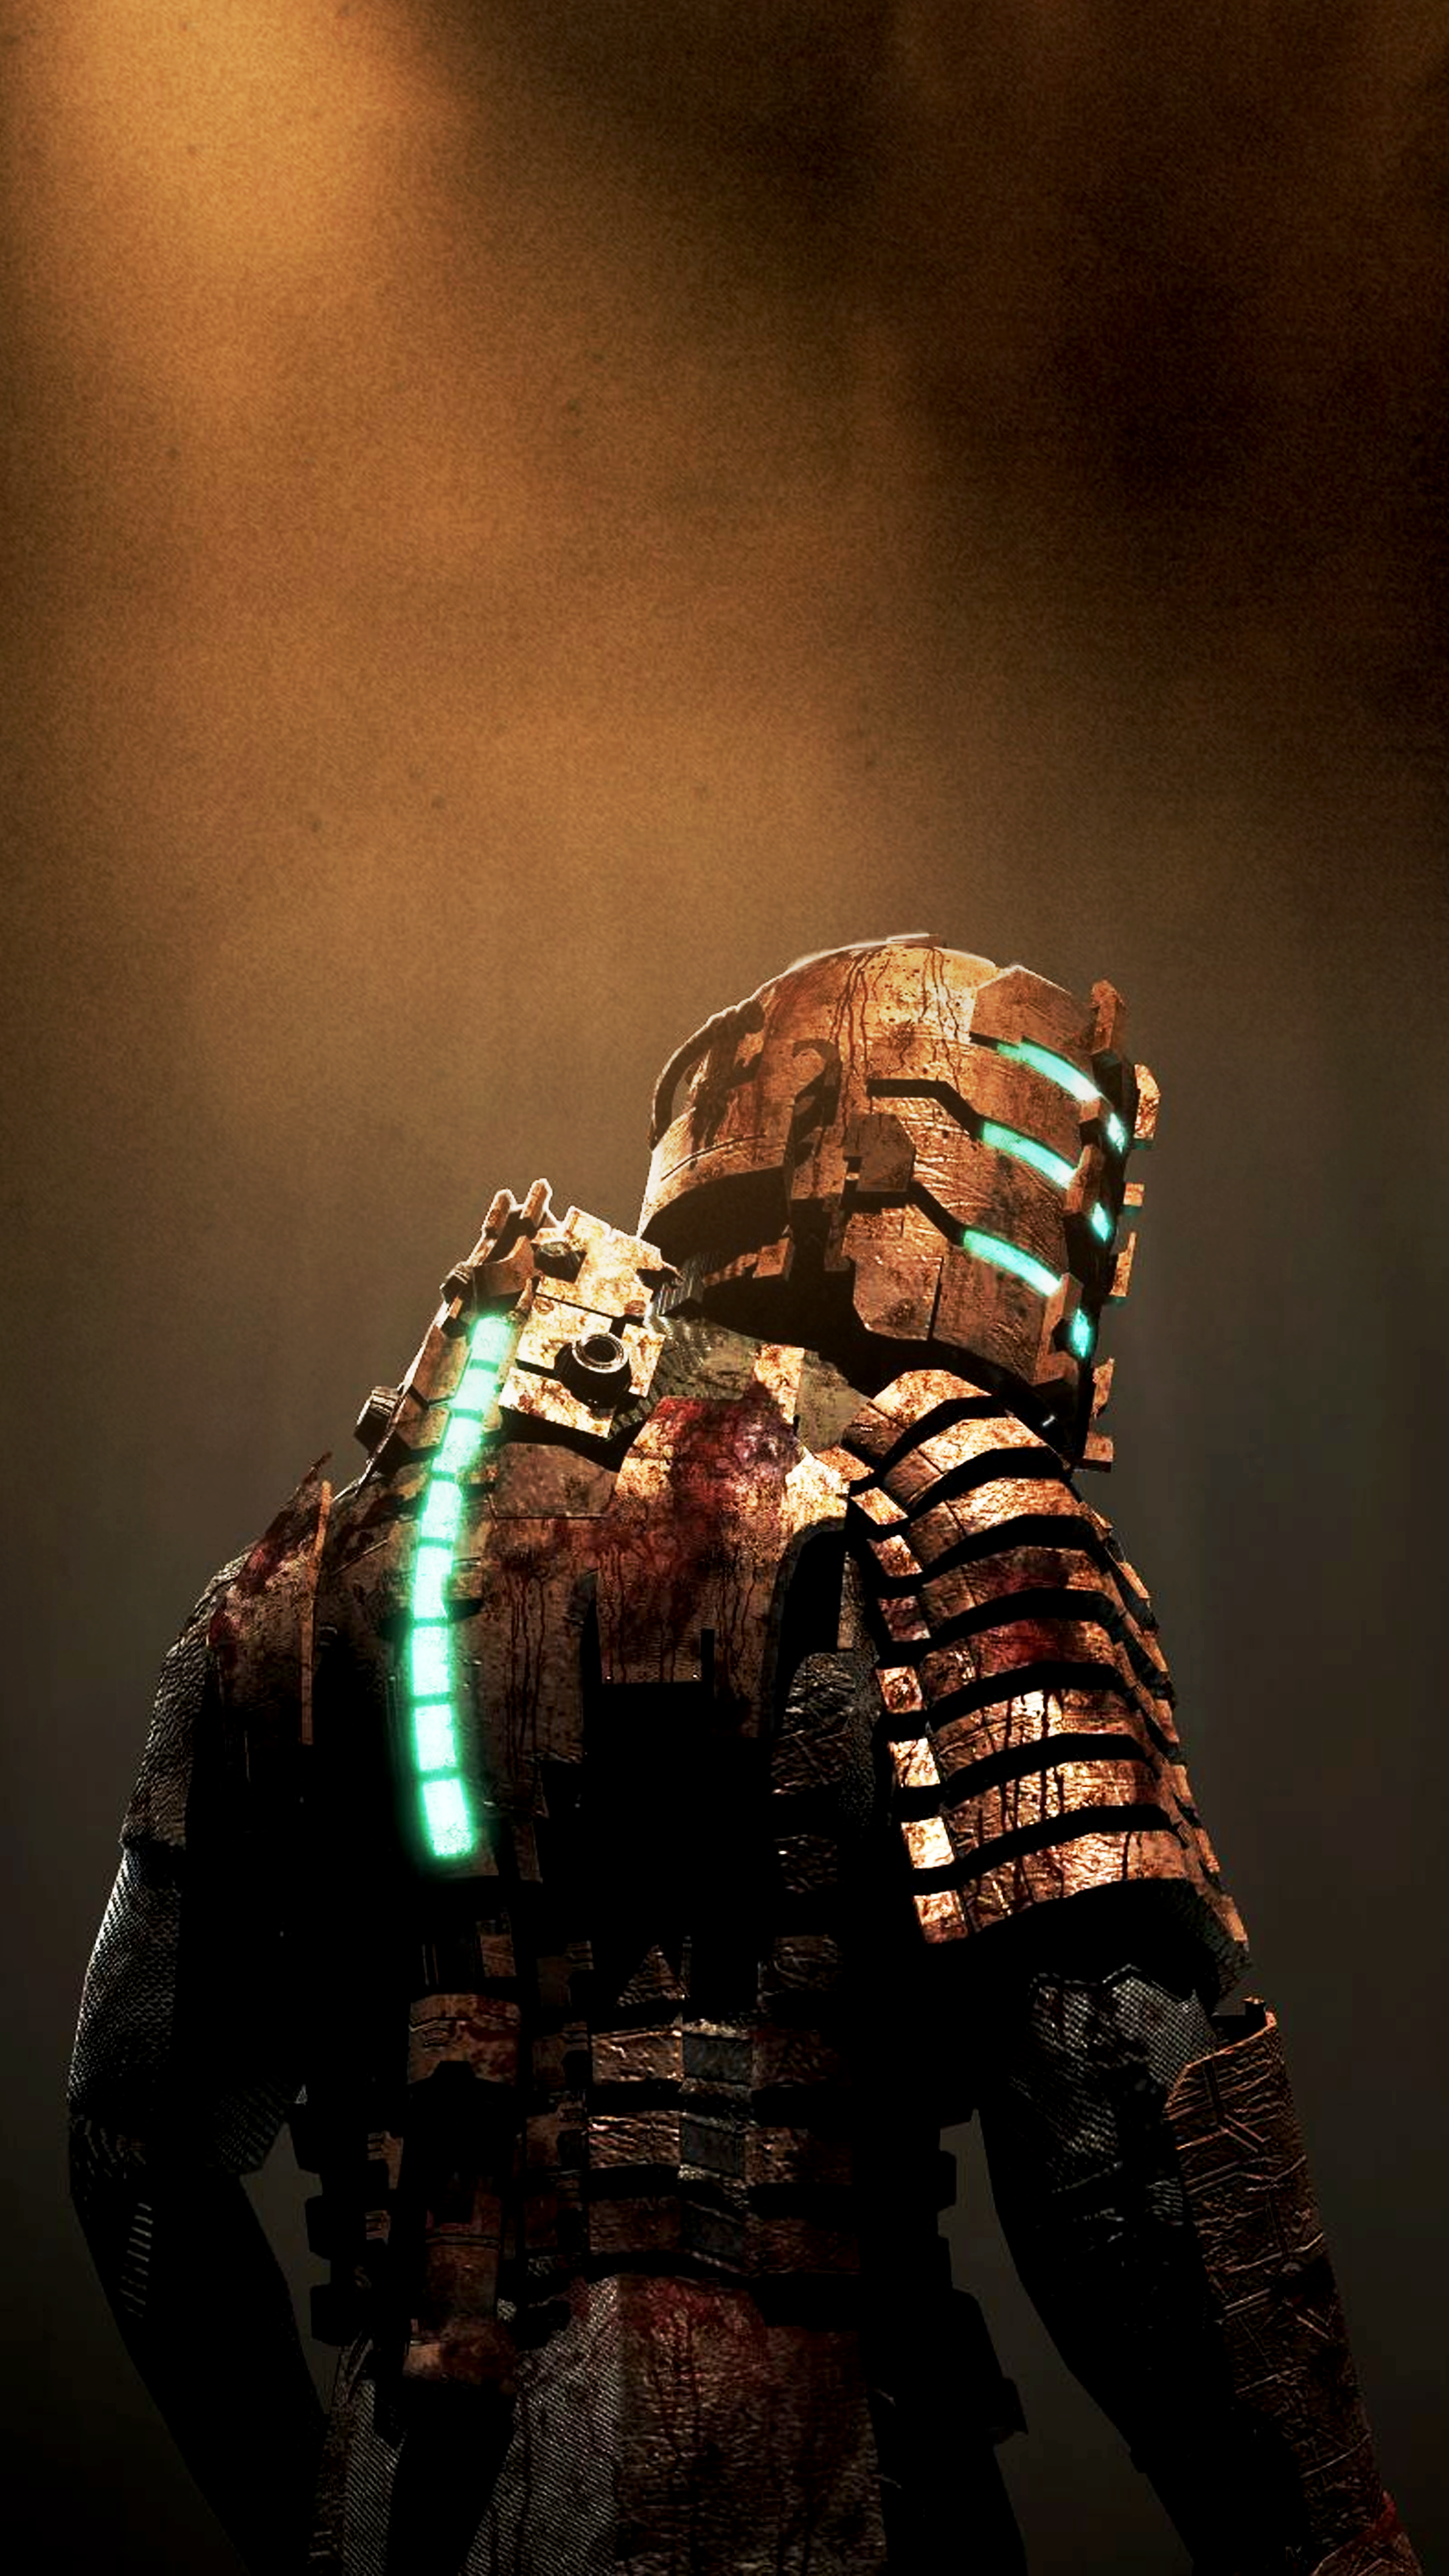 Dead Space Wallpaper for iPhone 11 Pro Max X 8 7 6  Free Download on  3Wallpapers